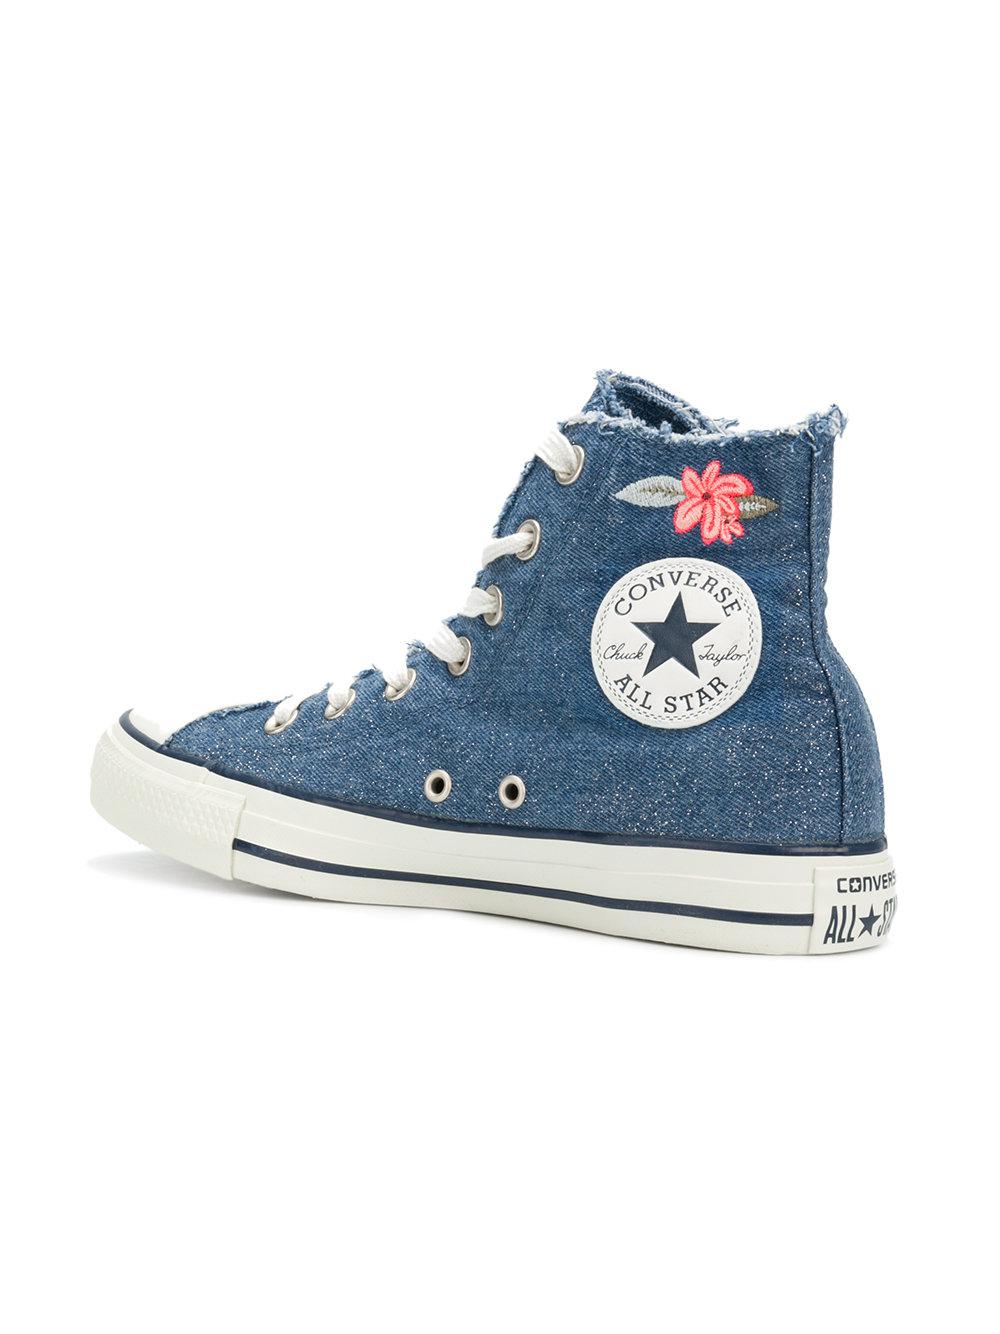 Converse Frayed Denim Floral Sneakers in Blue - Lyst